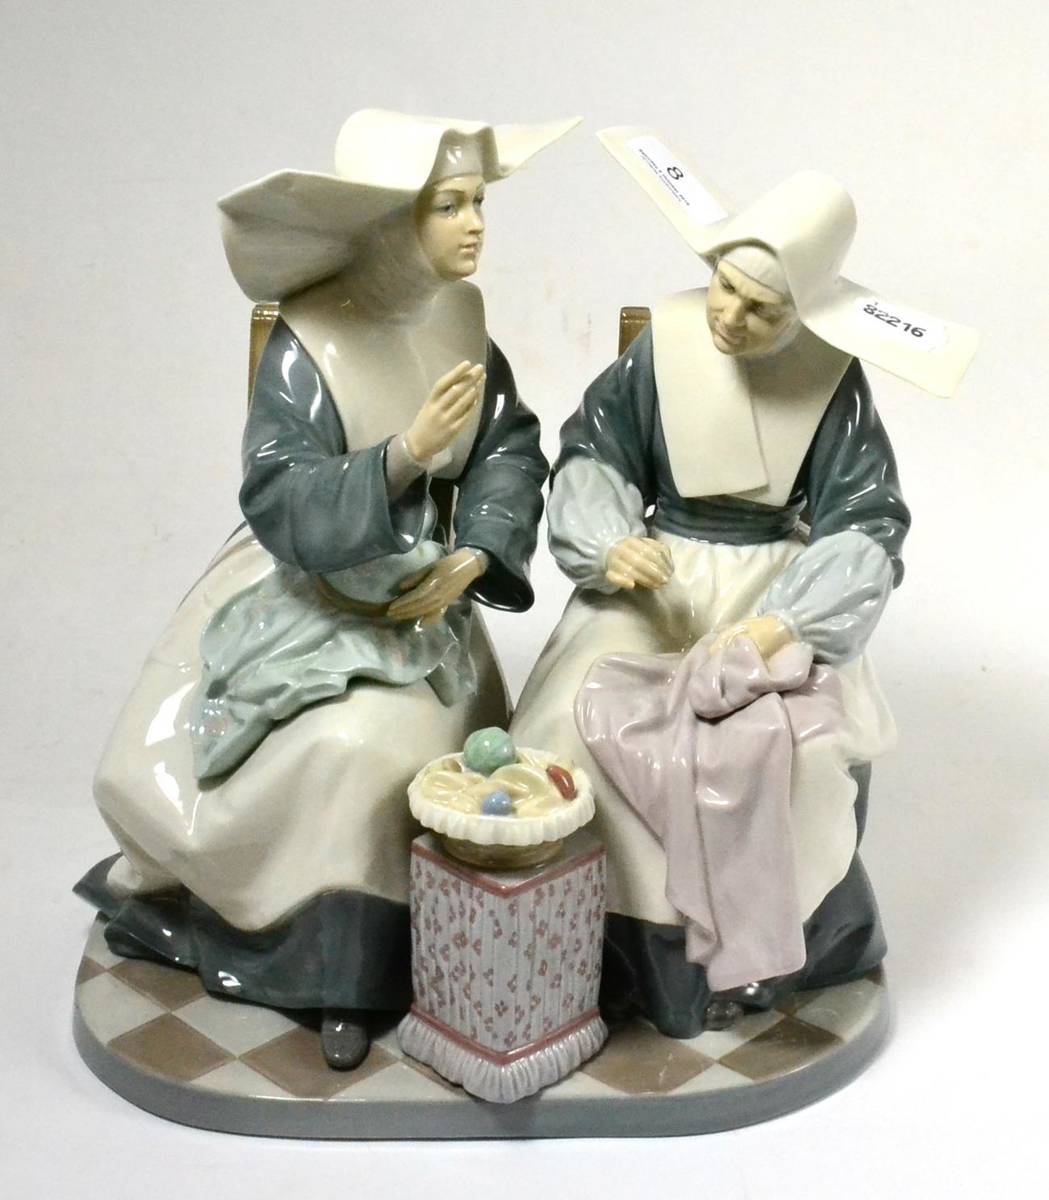 Lot 8 - Lladro porcelain group, two seated nuns in conversation